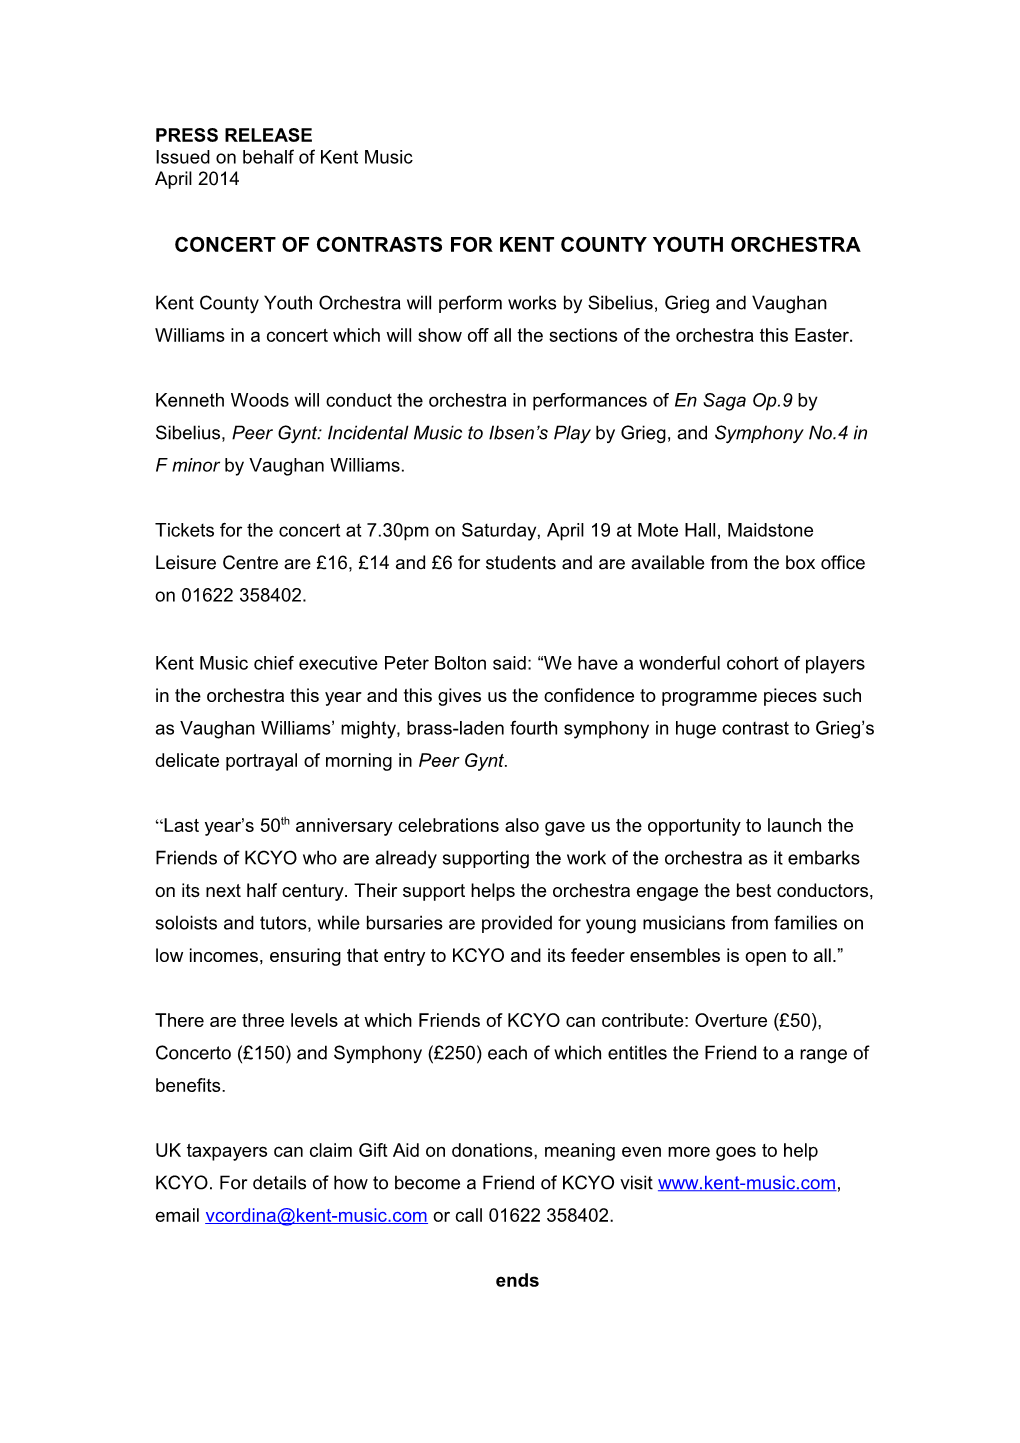 Concert of Contrasts for Kent County Youth Orchestra